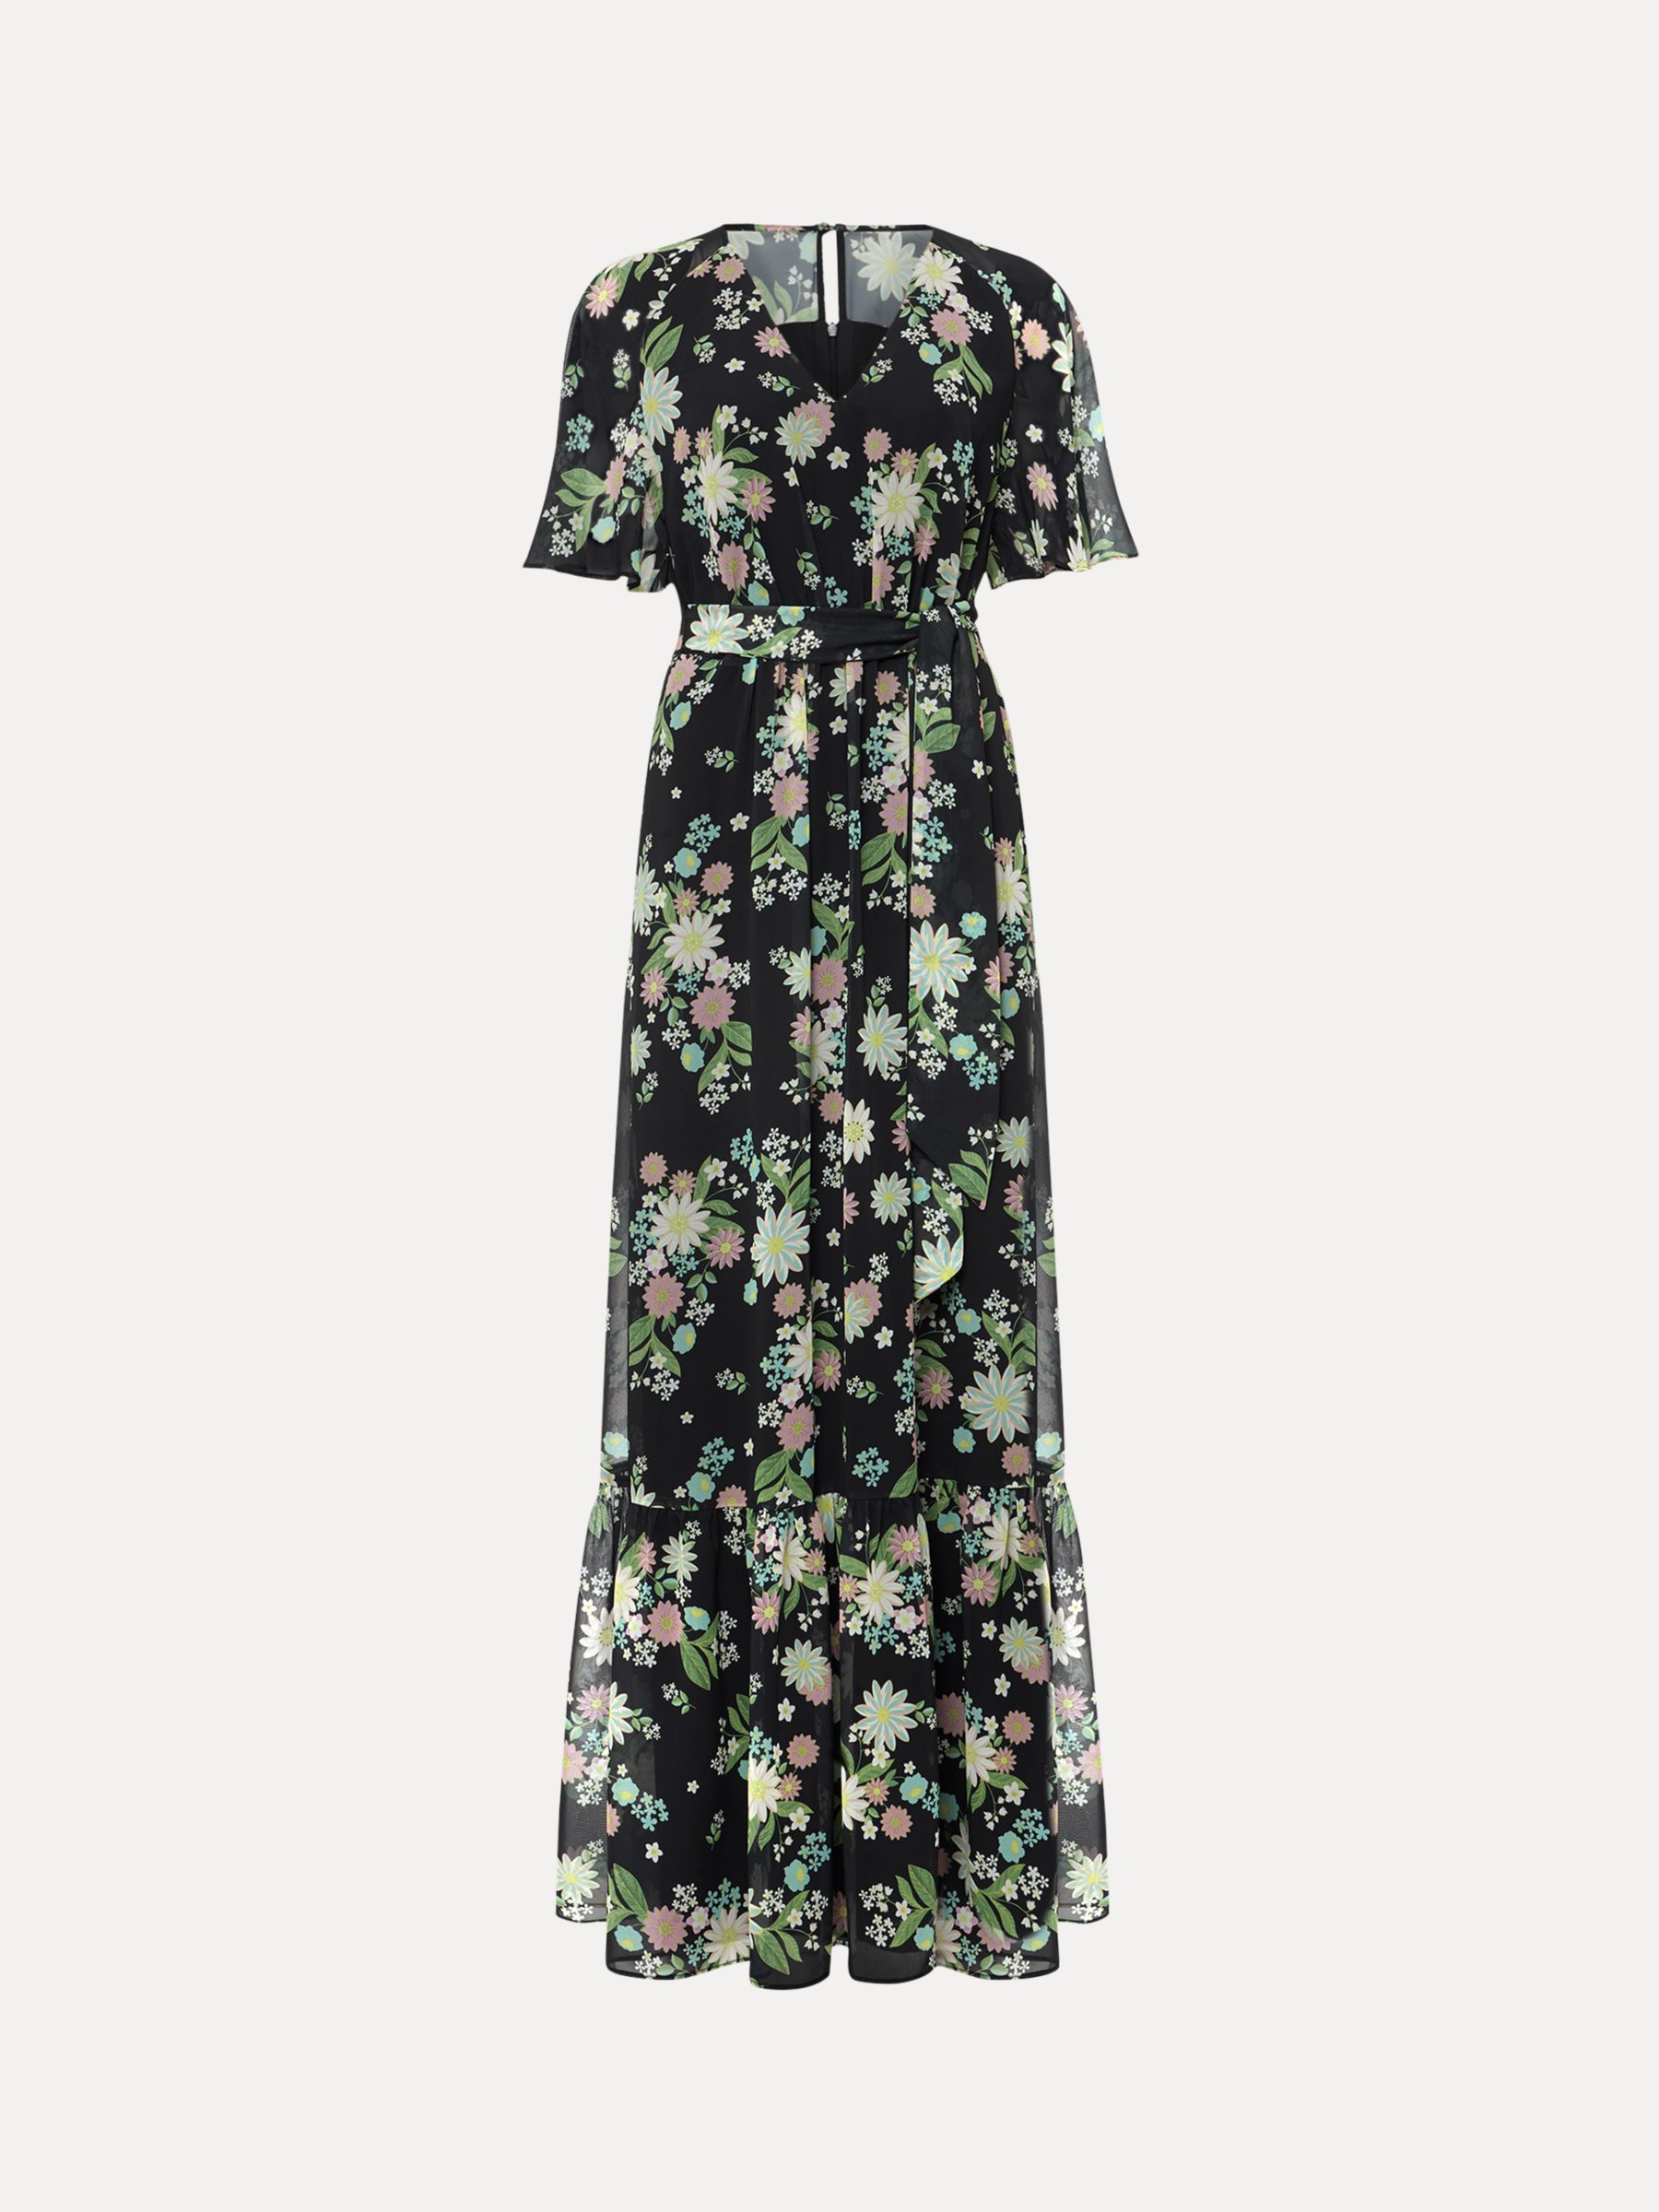 Phase Eight Georgie Tiered Floral Maxi Dress, Navy/Multi, 6